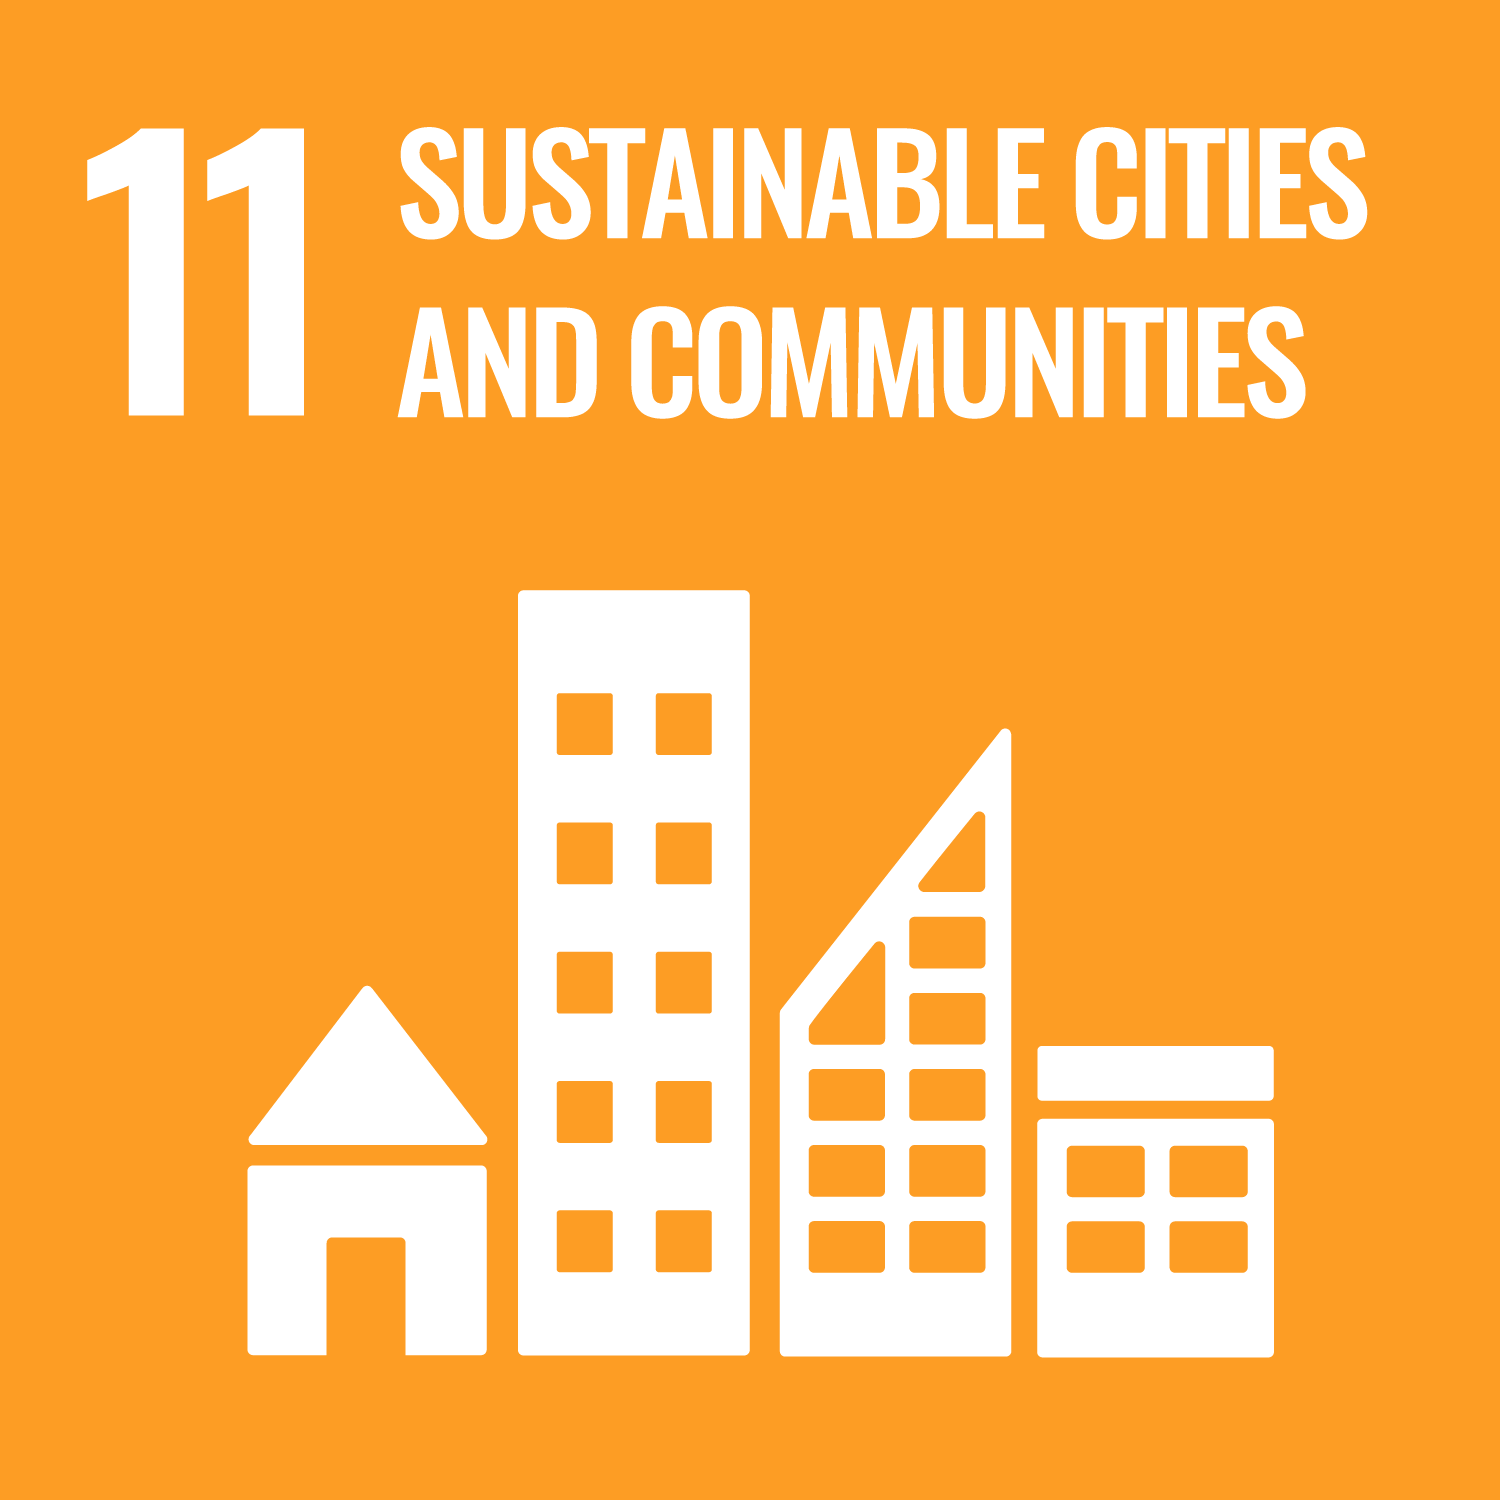 UN Sustainable Development Goal 11 - Sustainable Cities and Communities